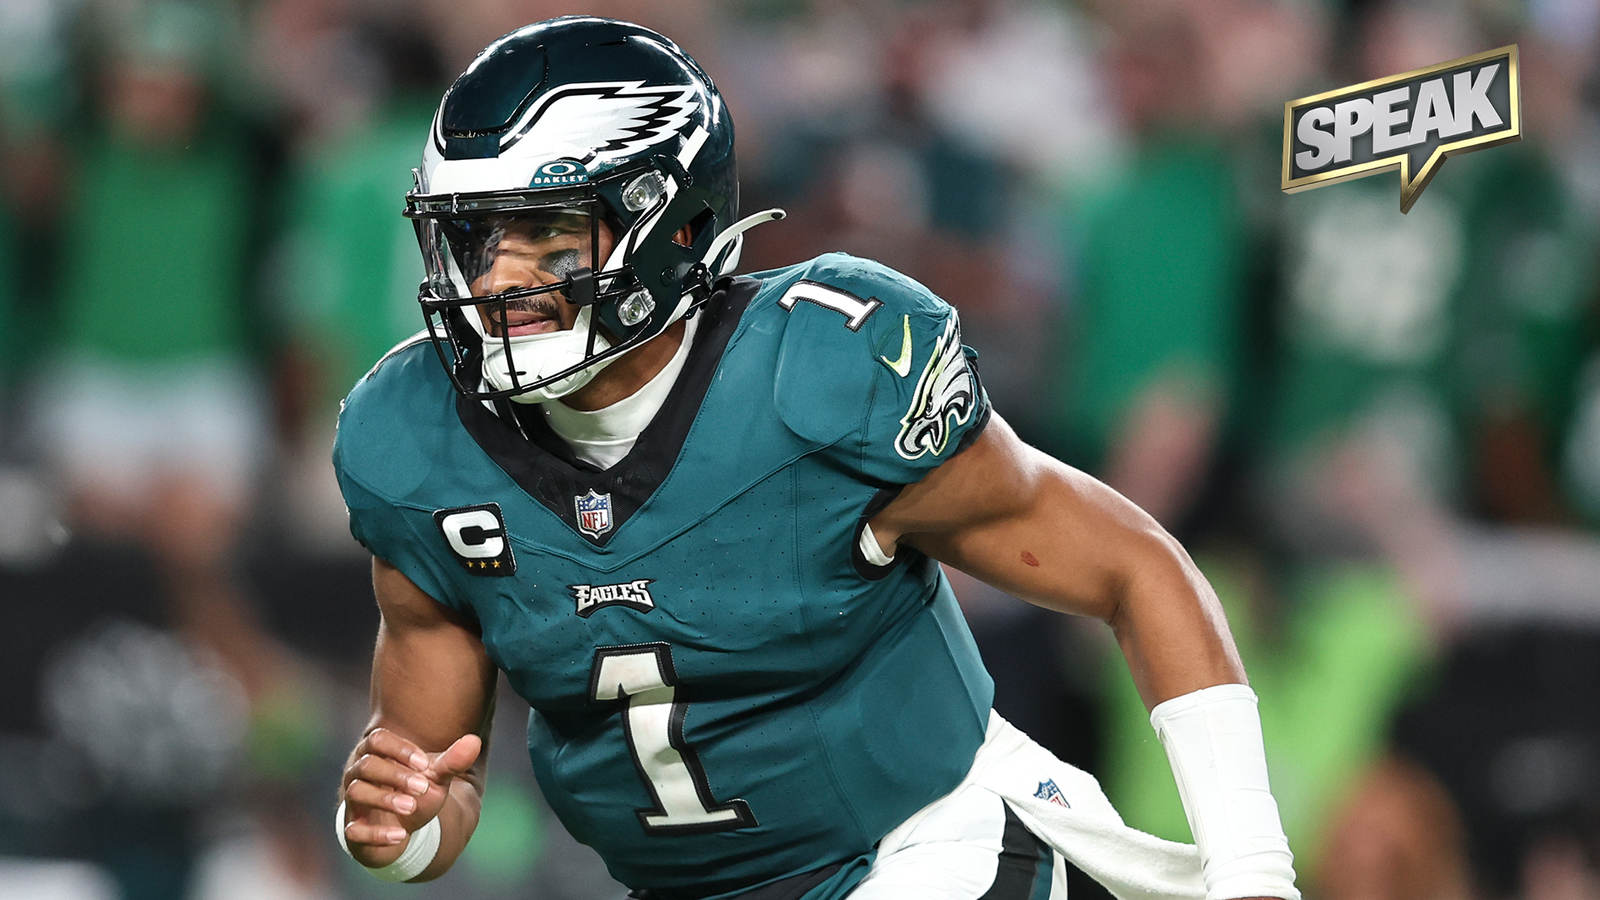 Do the Eagles look like Super Bowl contenders?